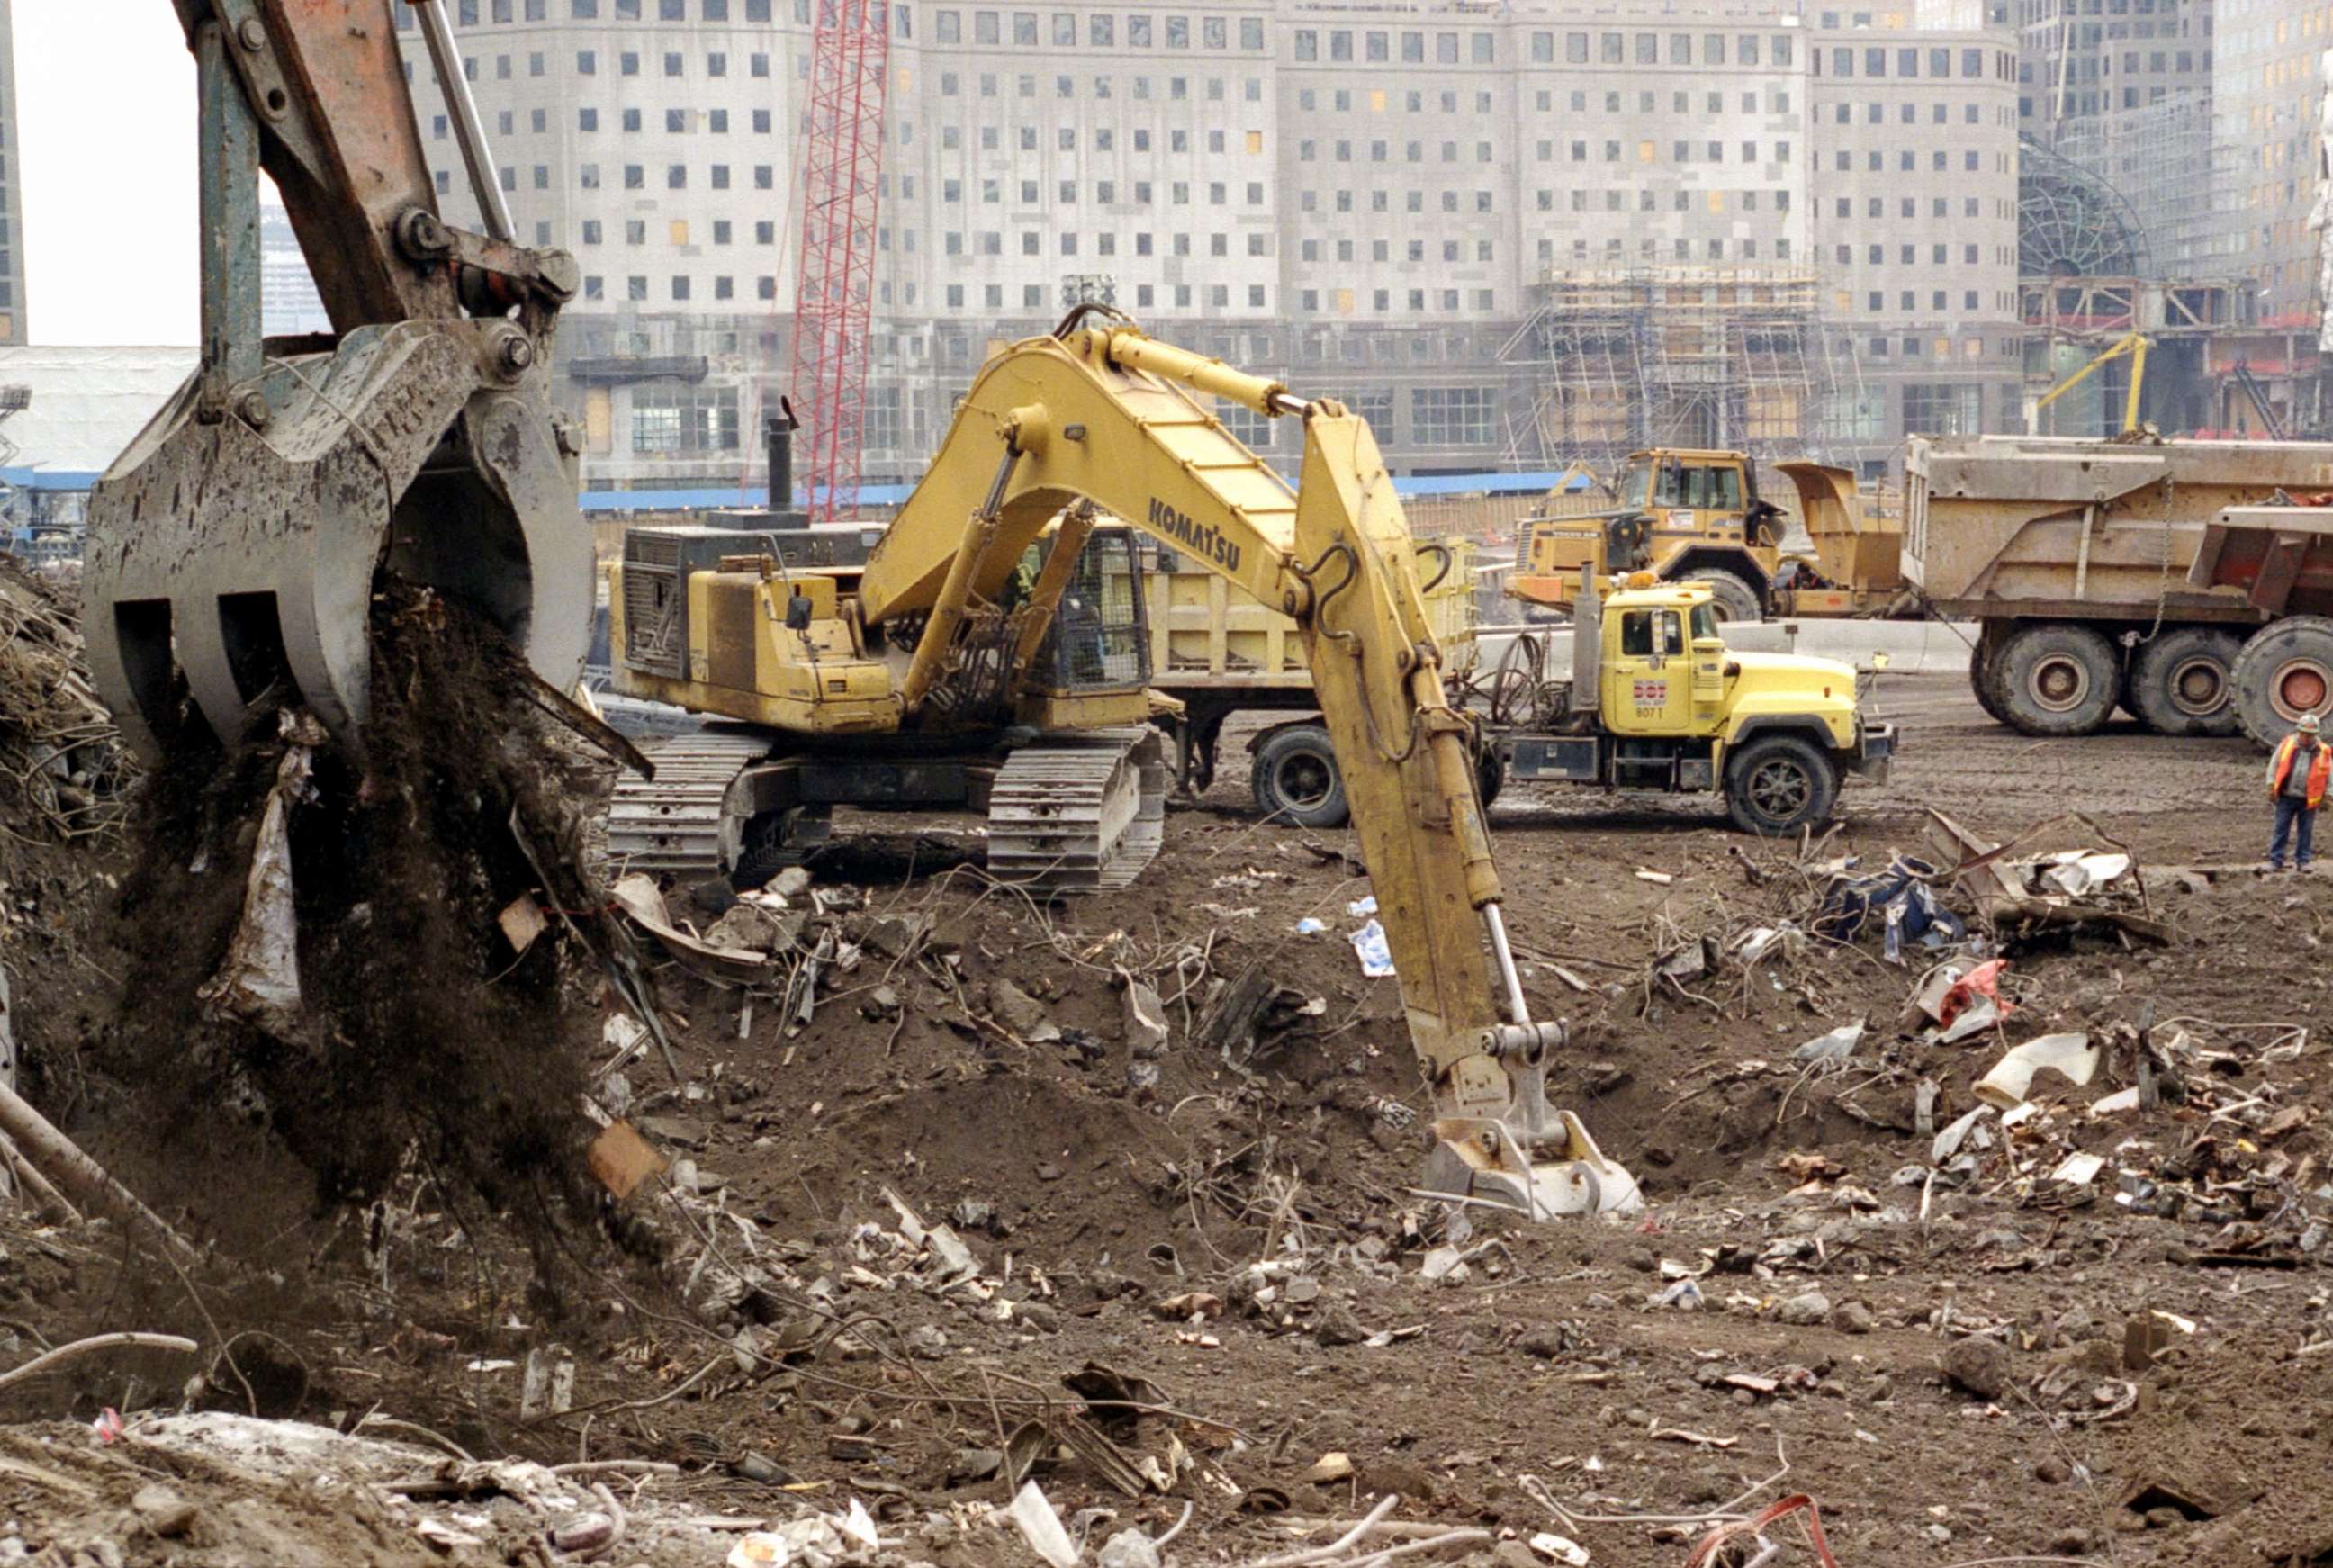 PHOTO: Earth movers collect debris to be sifted through by fire fighters and Port Authority Police officers in order to recover remains and evidence at Ground Zero, the former site of the World Trade Center, Feb. 22, 2002, in New York City.